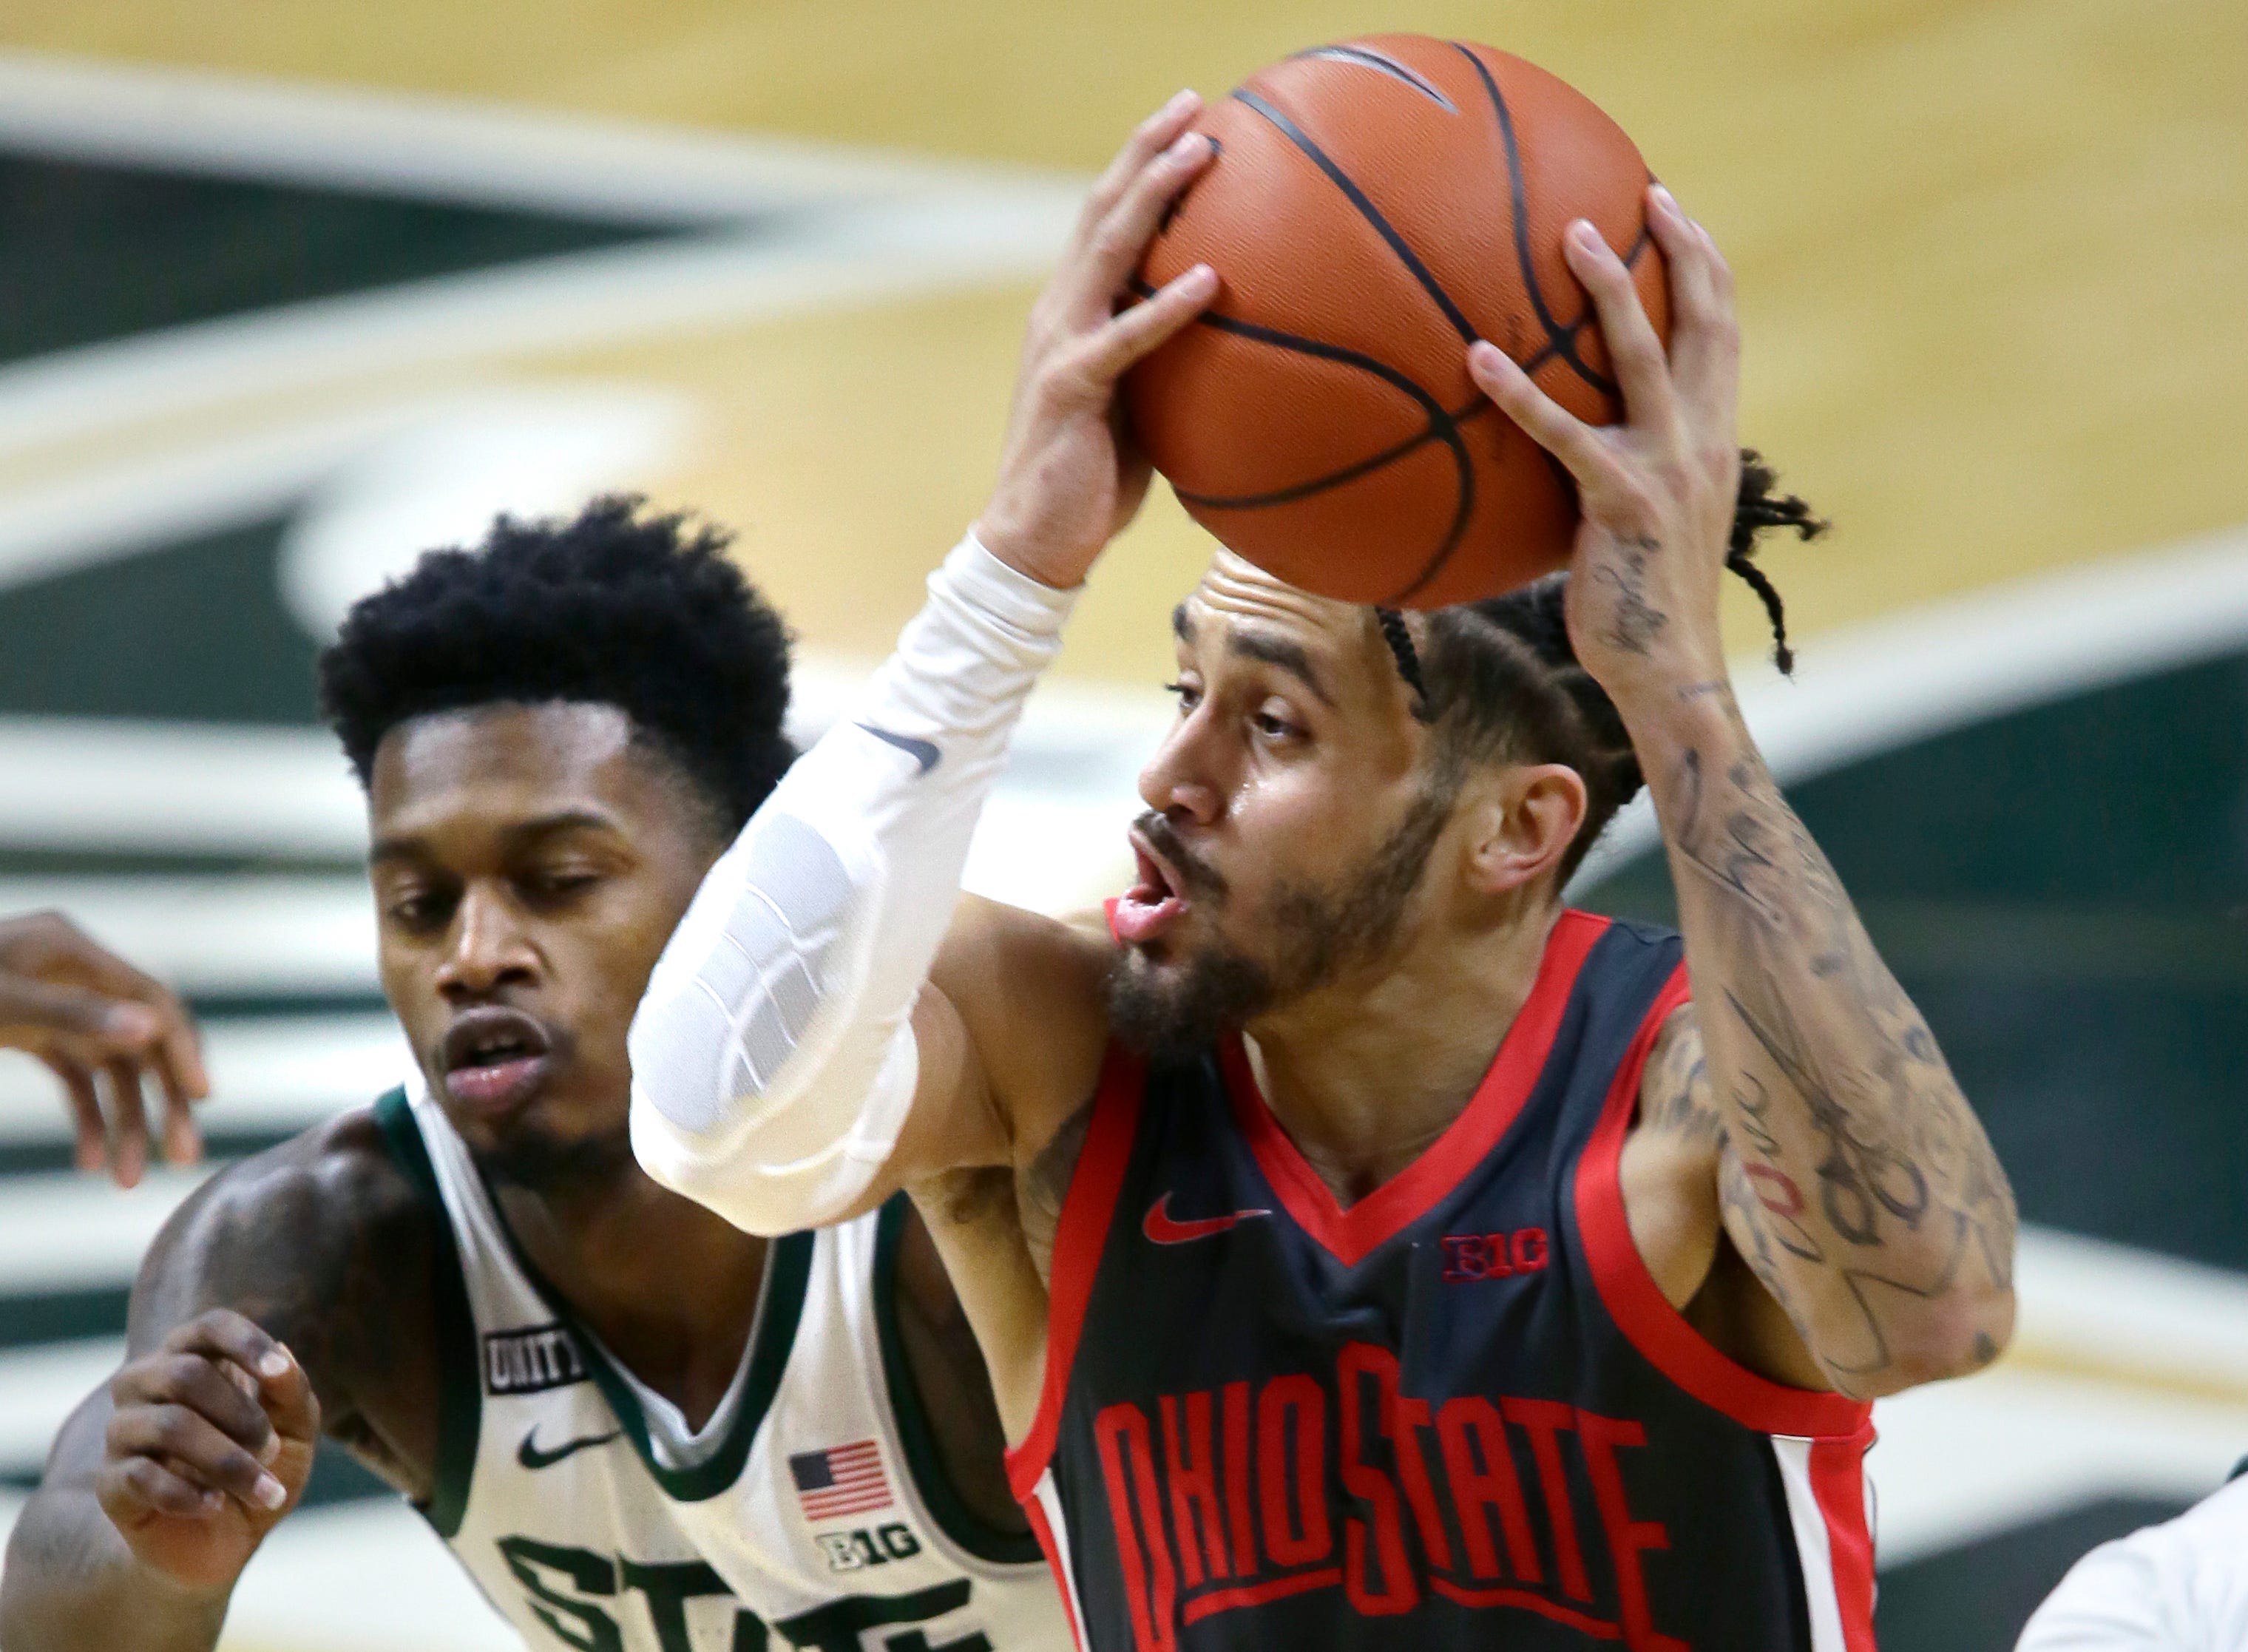 Ohio State guard Duane Washington Jr. drives to the basket against Michigan State guard Rocket Watts during the first half.